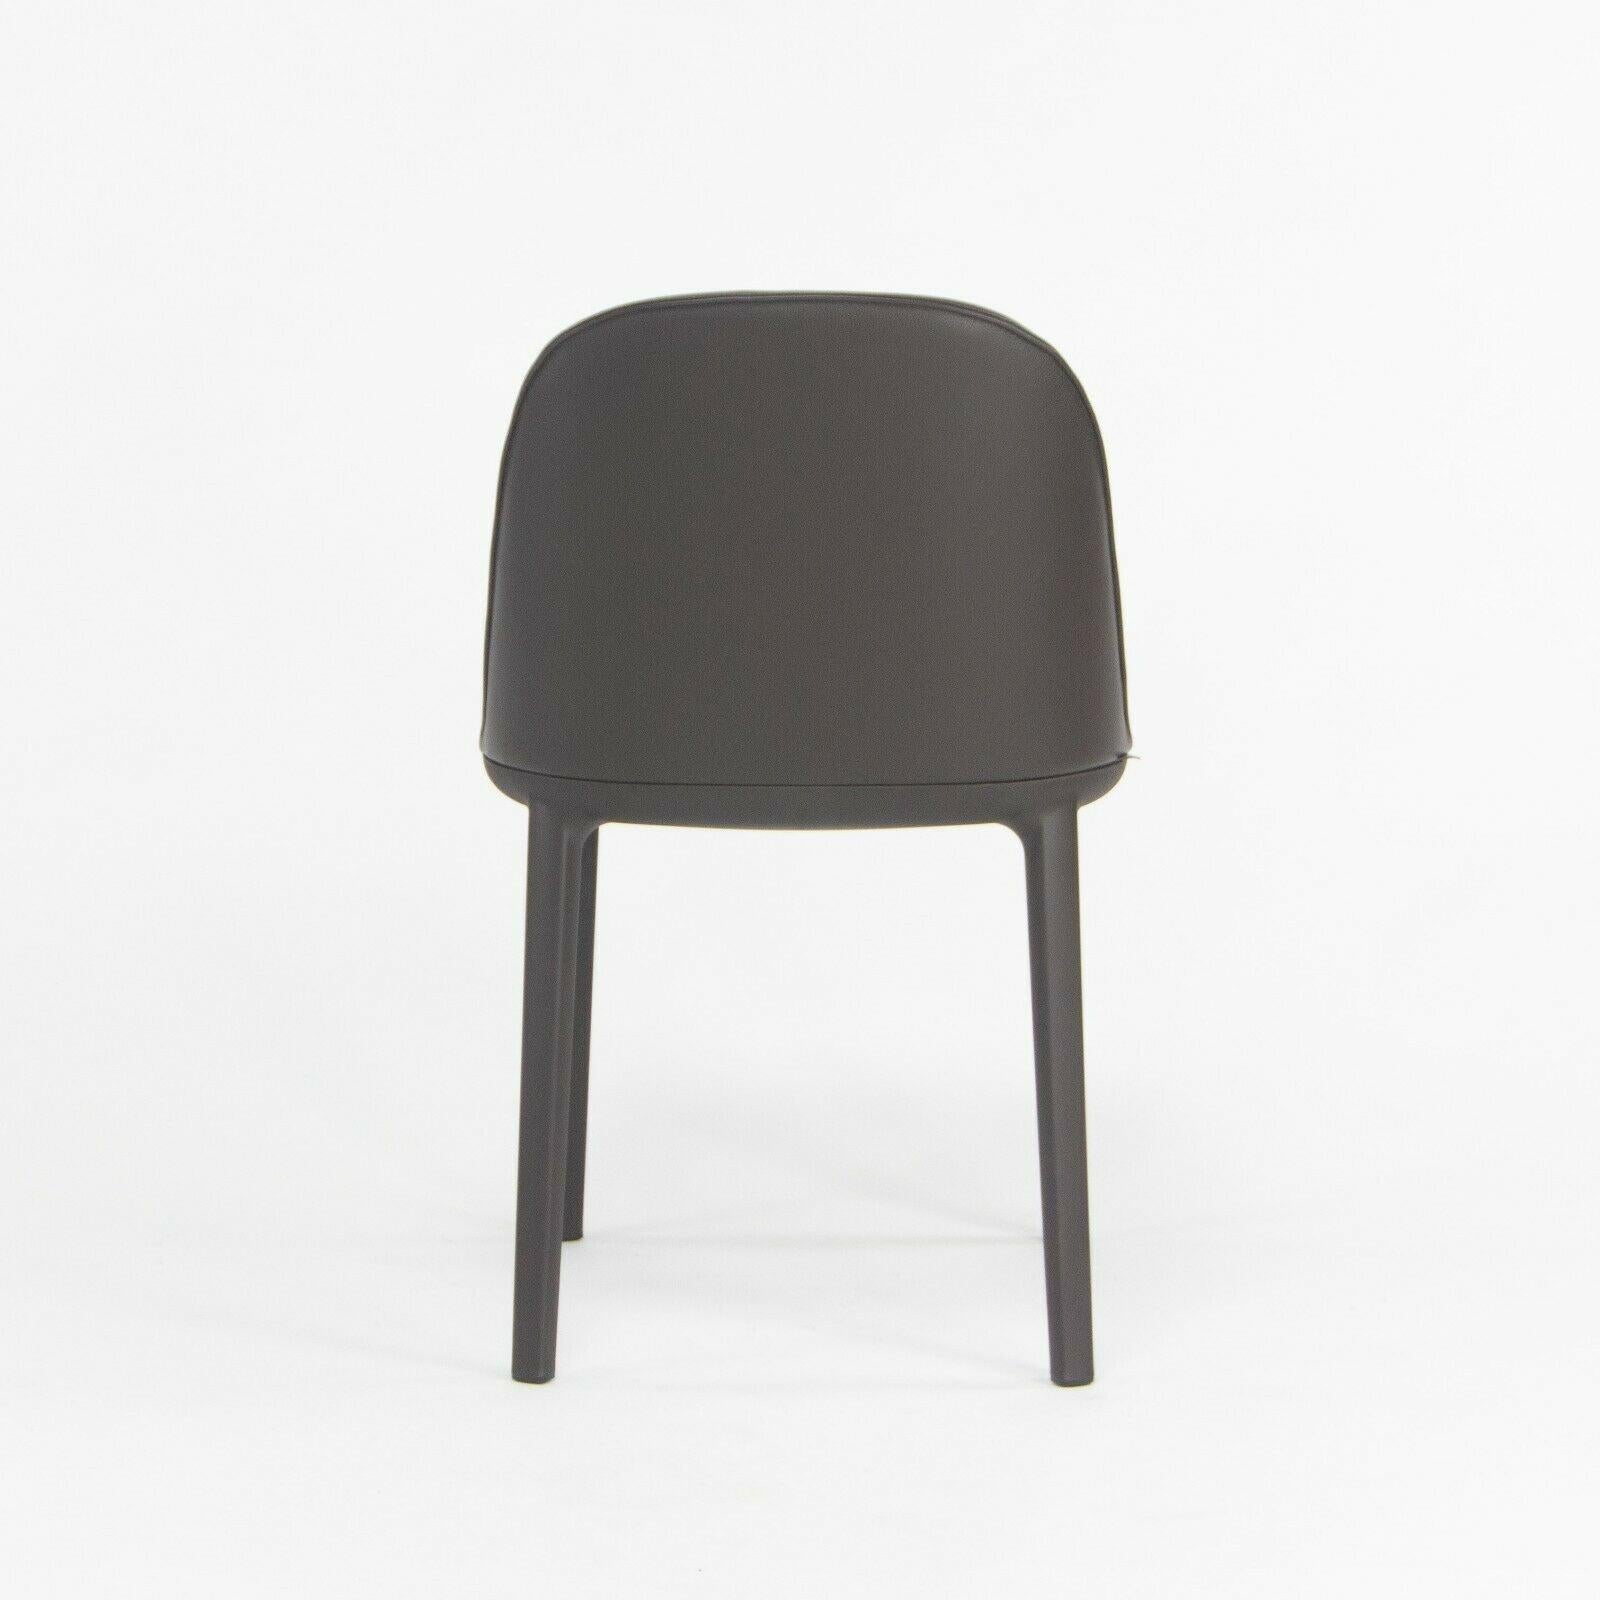 Contemporary 2019 Vitra Softshell Side Chair w Dark Brown Leather by Ronan & Erwan Bouroullec For Sale